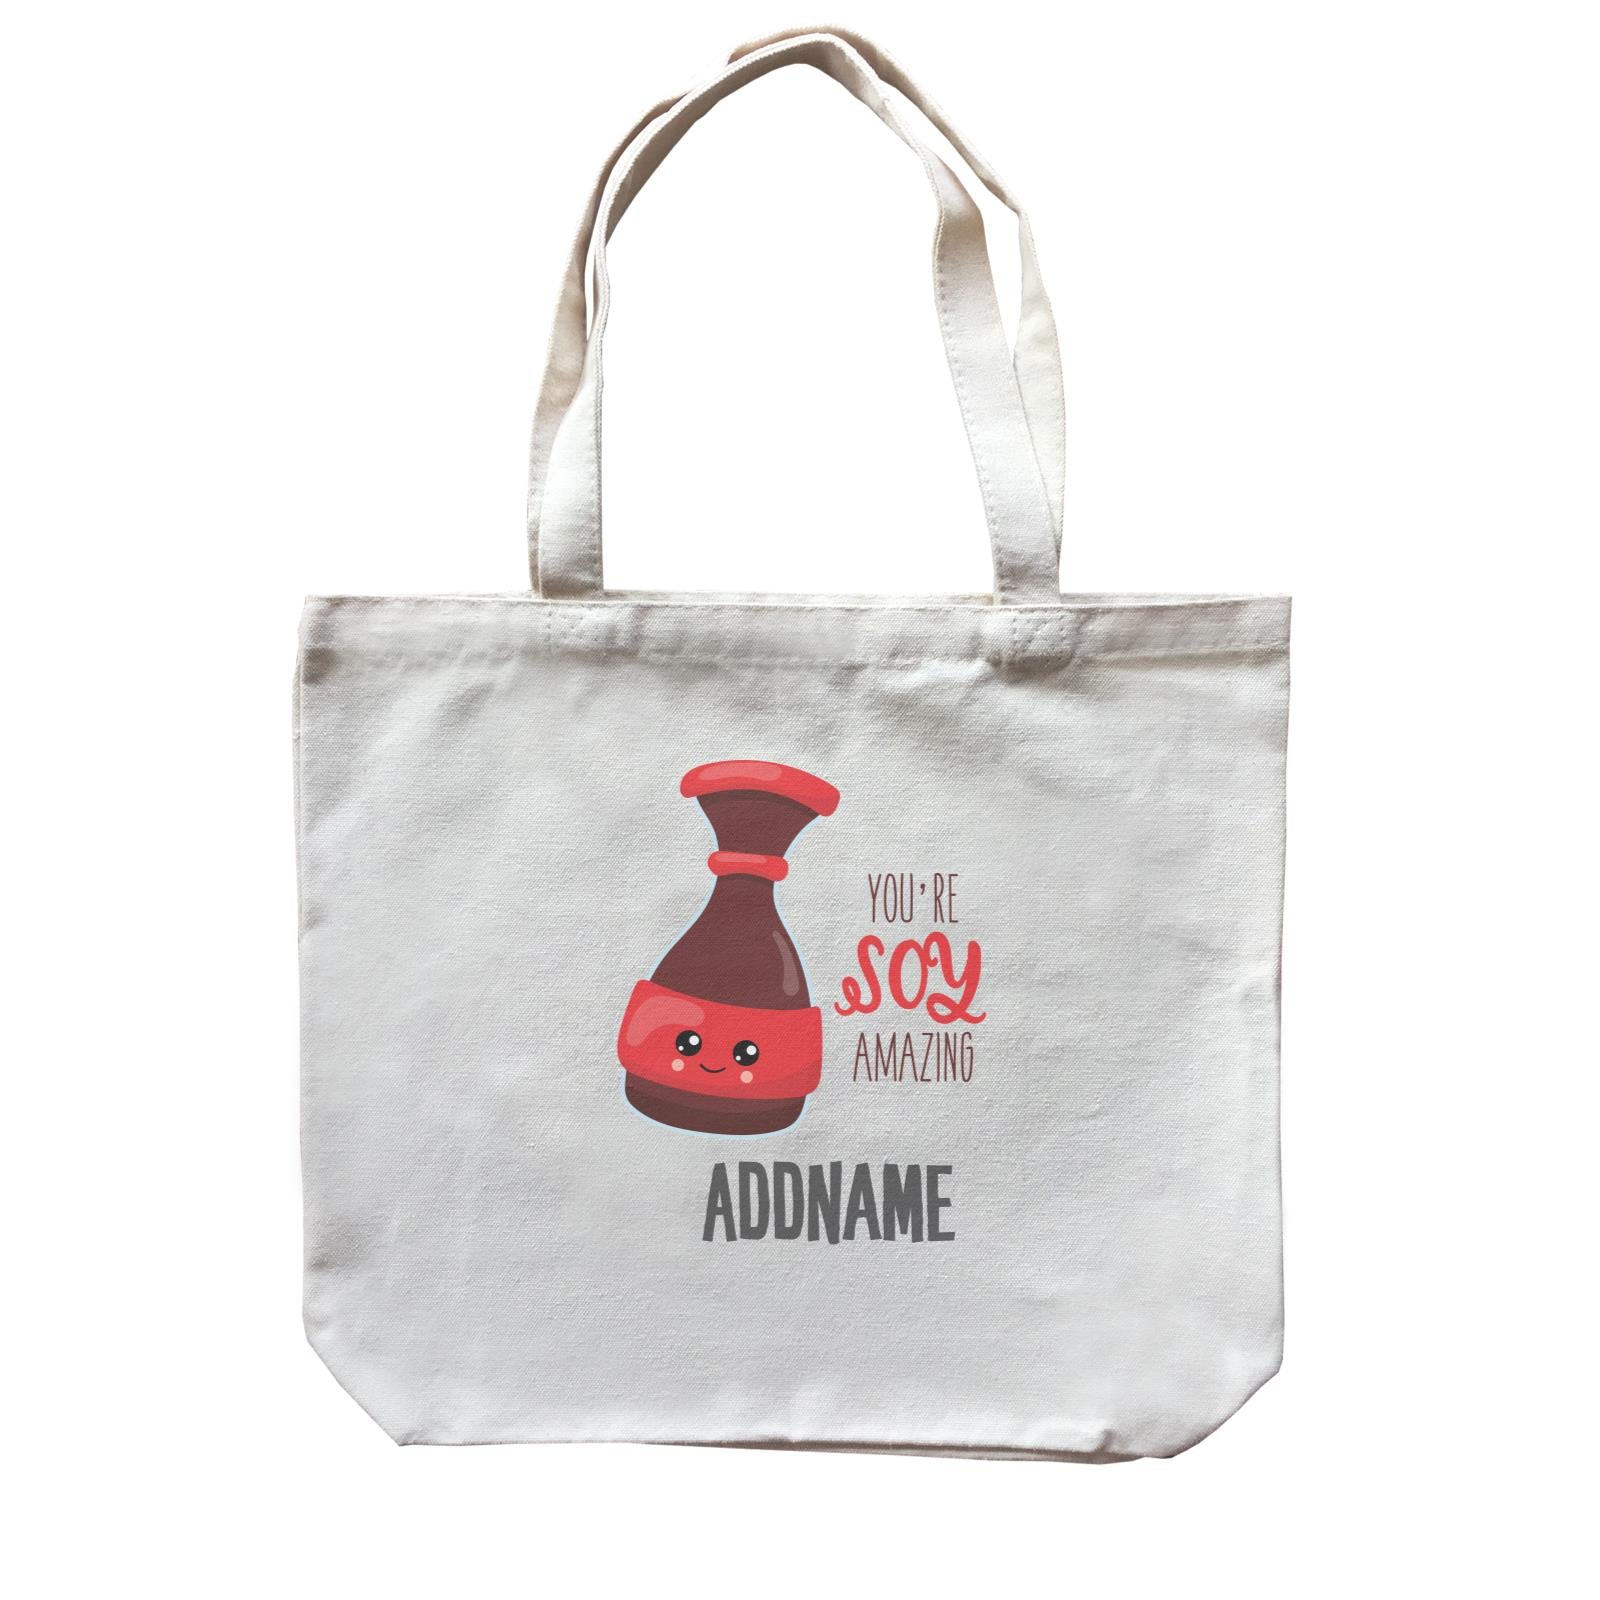 You're Soy Amazing Soy Sauce Addname Canvas Bag